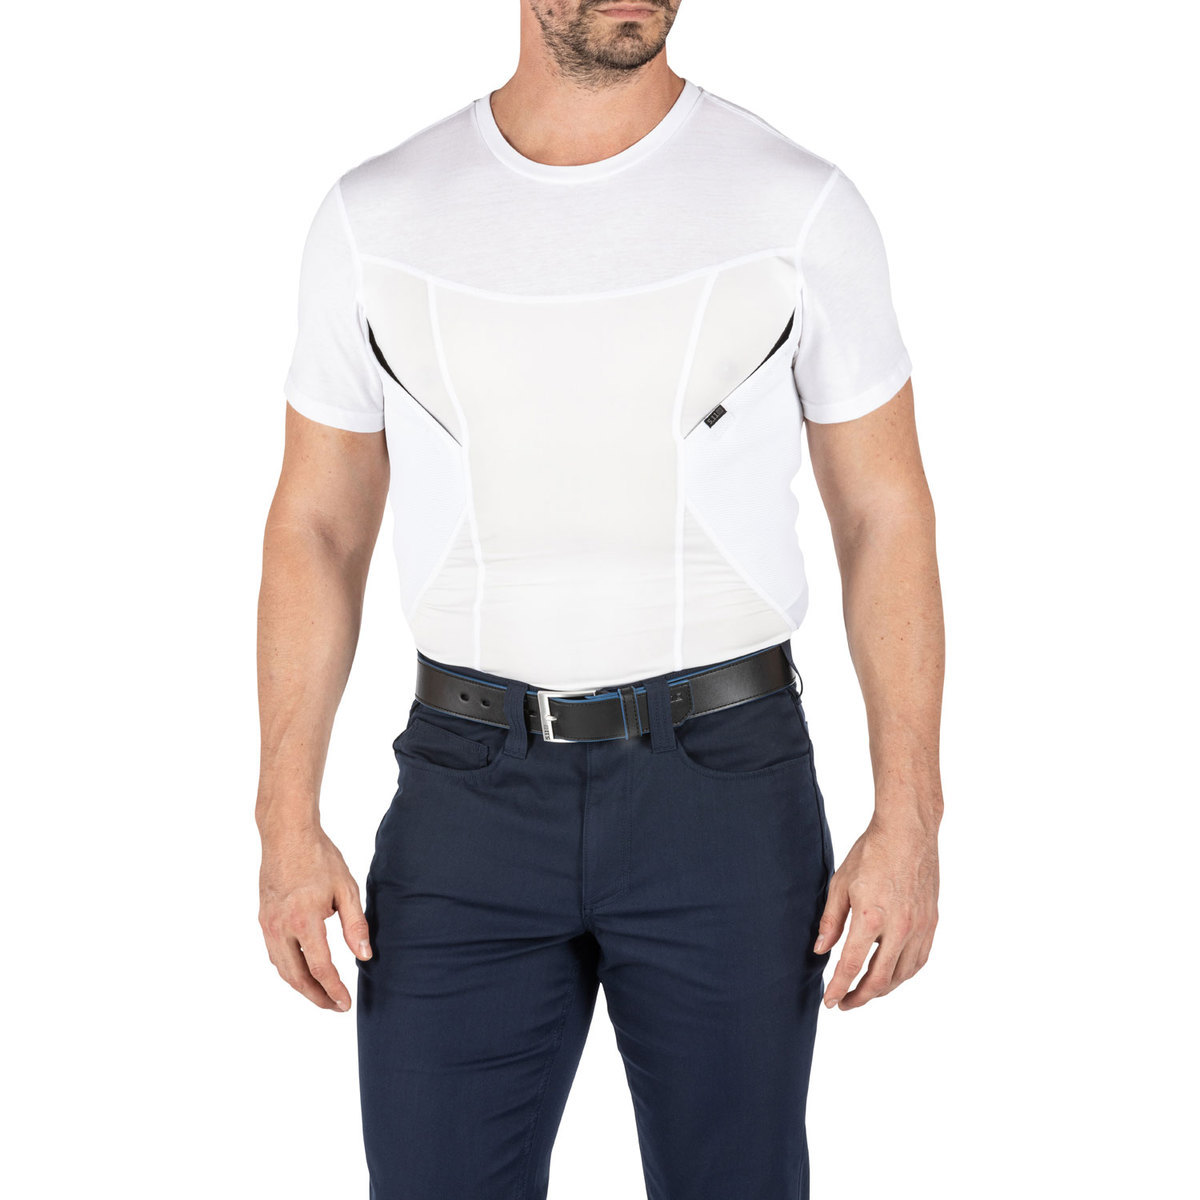 5.11 Men's CAMS Compression Base Layer Concealed Carry Holster Shirt  Sportsman's Warehouse